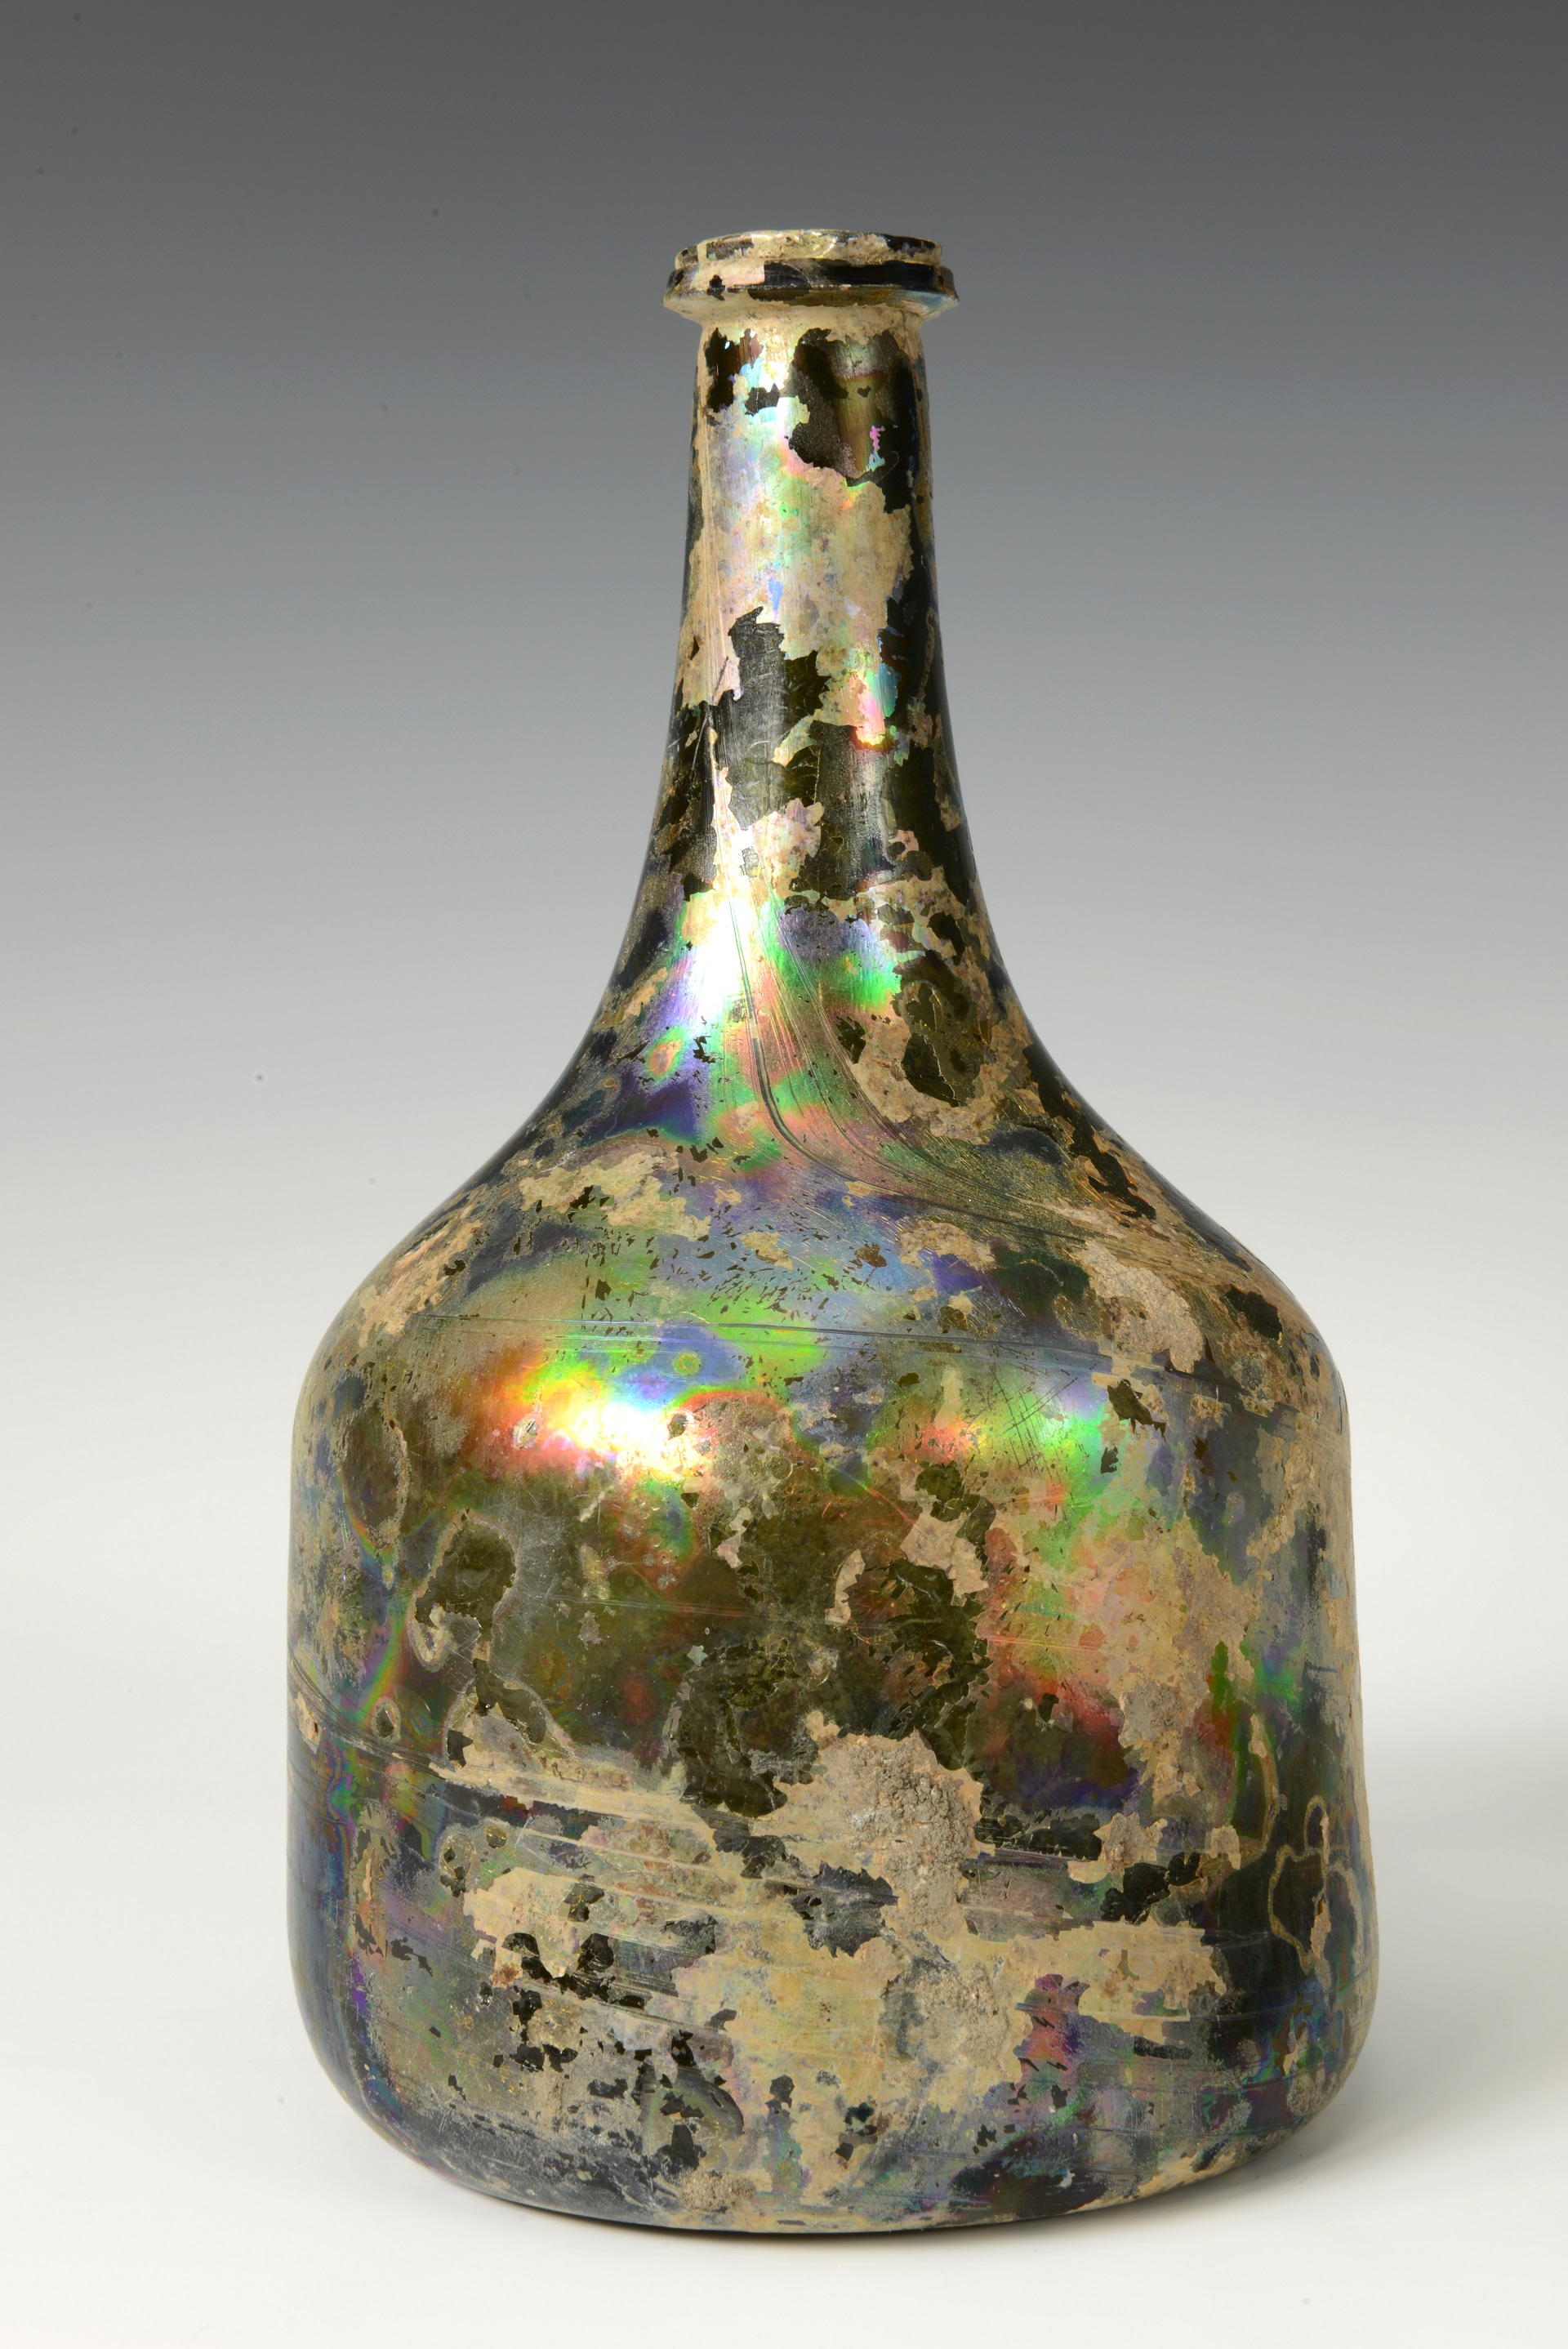 A coloured photograph of a glass bottle with an iridescent surface.